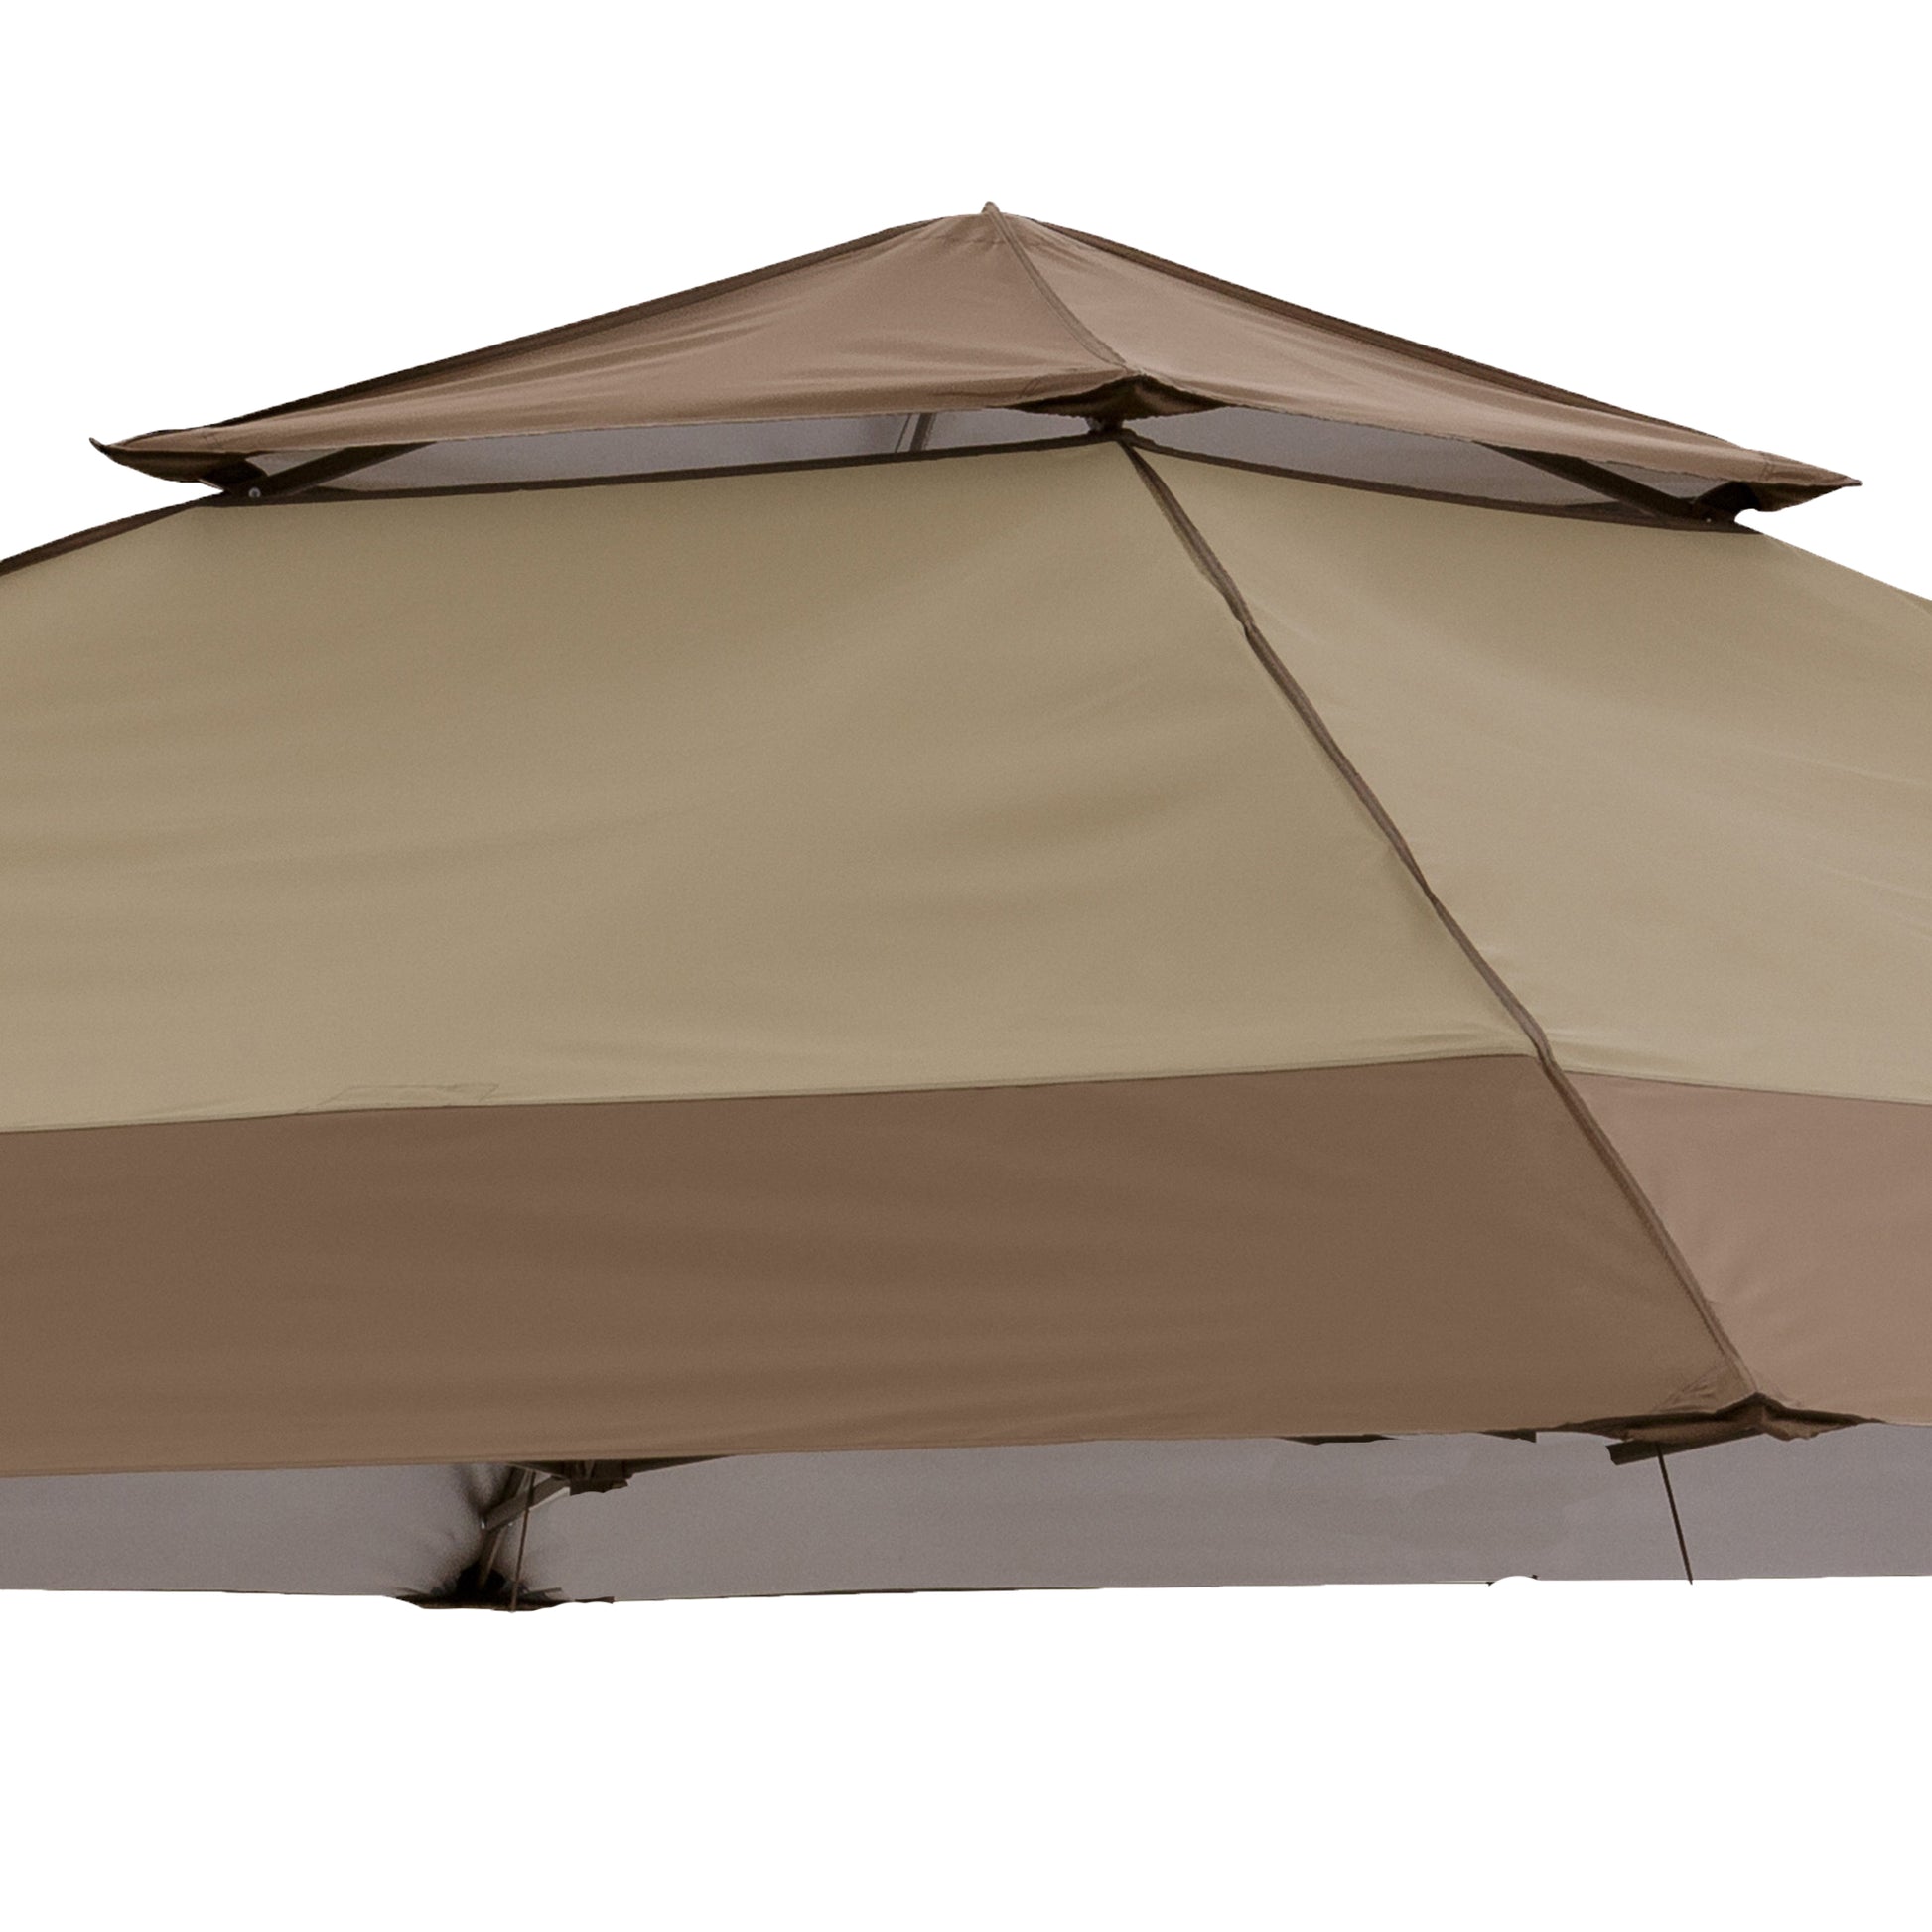  This photo showcases the vented roof of a brown pagoda-style canopy top, which is a crucial component of Canopy Parts. The vented design allows for enhanced airflow, which can be particularly useful in maintaining a comfortable environment under the canopy. This feature helps prevent heat buildup and promotes ventilation, making it an essential element for outdoor gatherings and events.